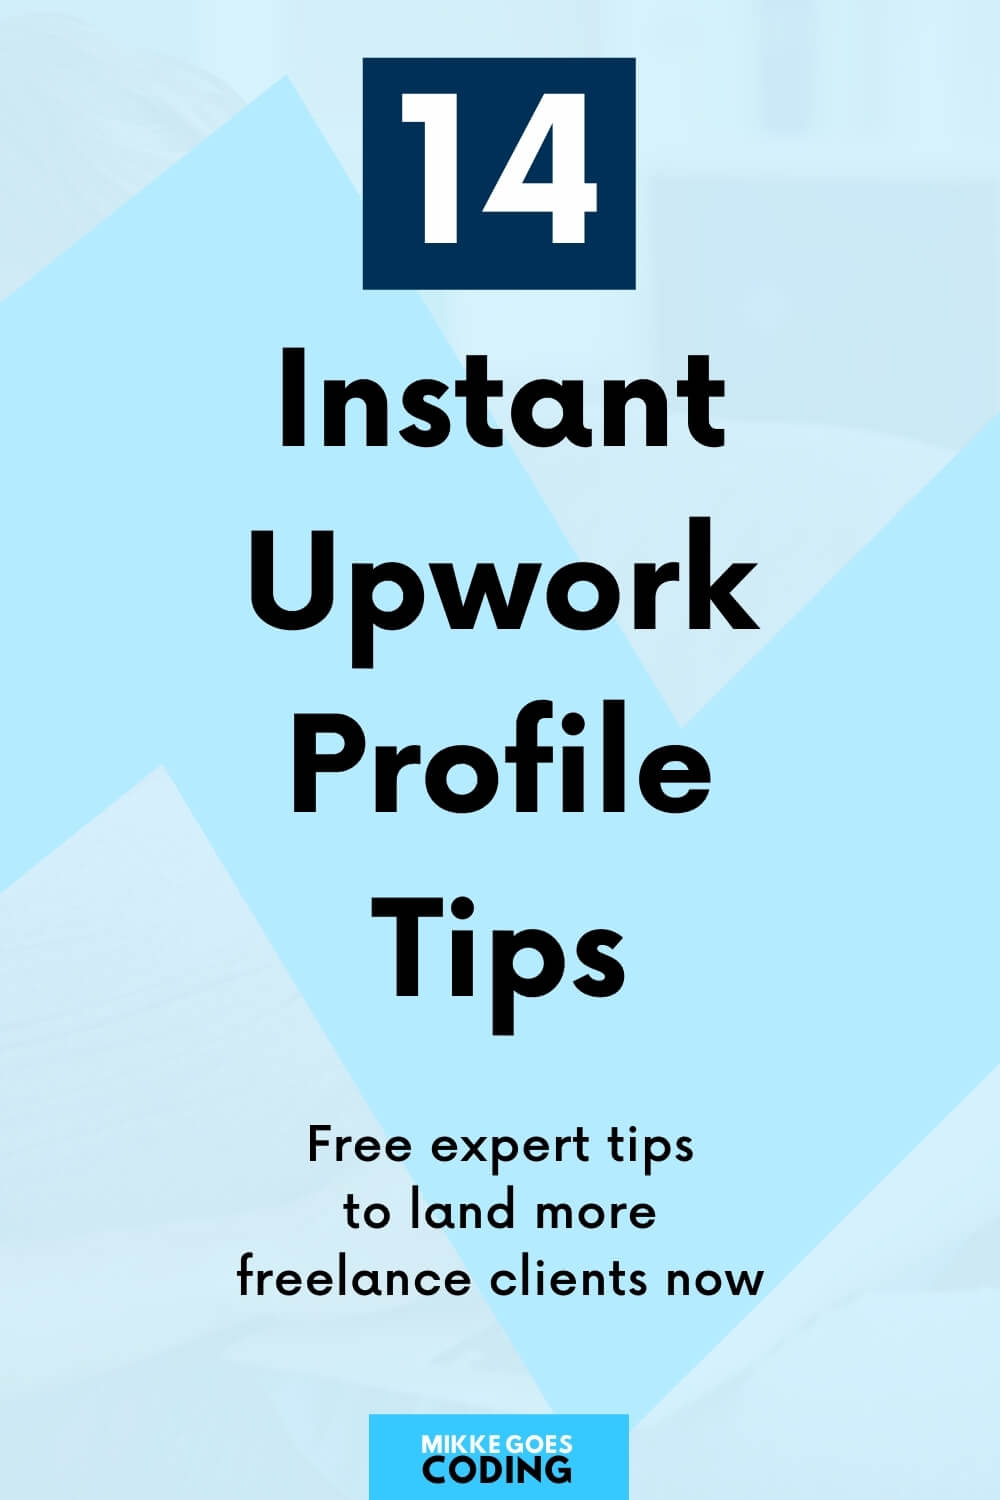 Upwork profile examples - How to create an Upwork profile to get hired faster